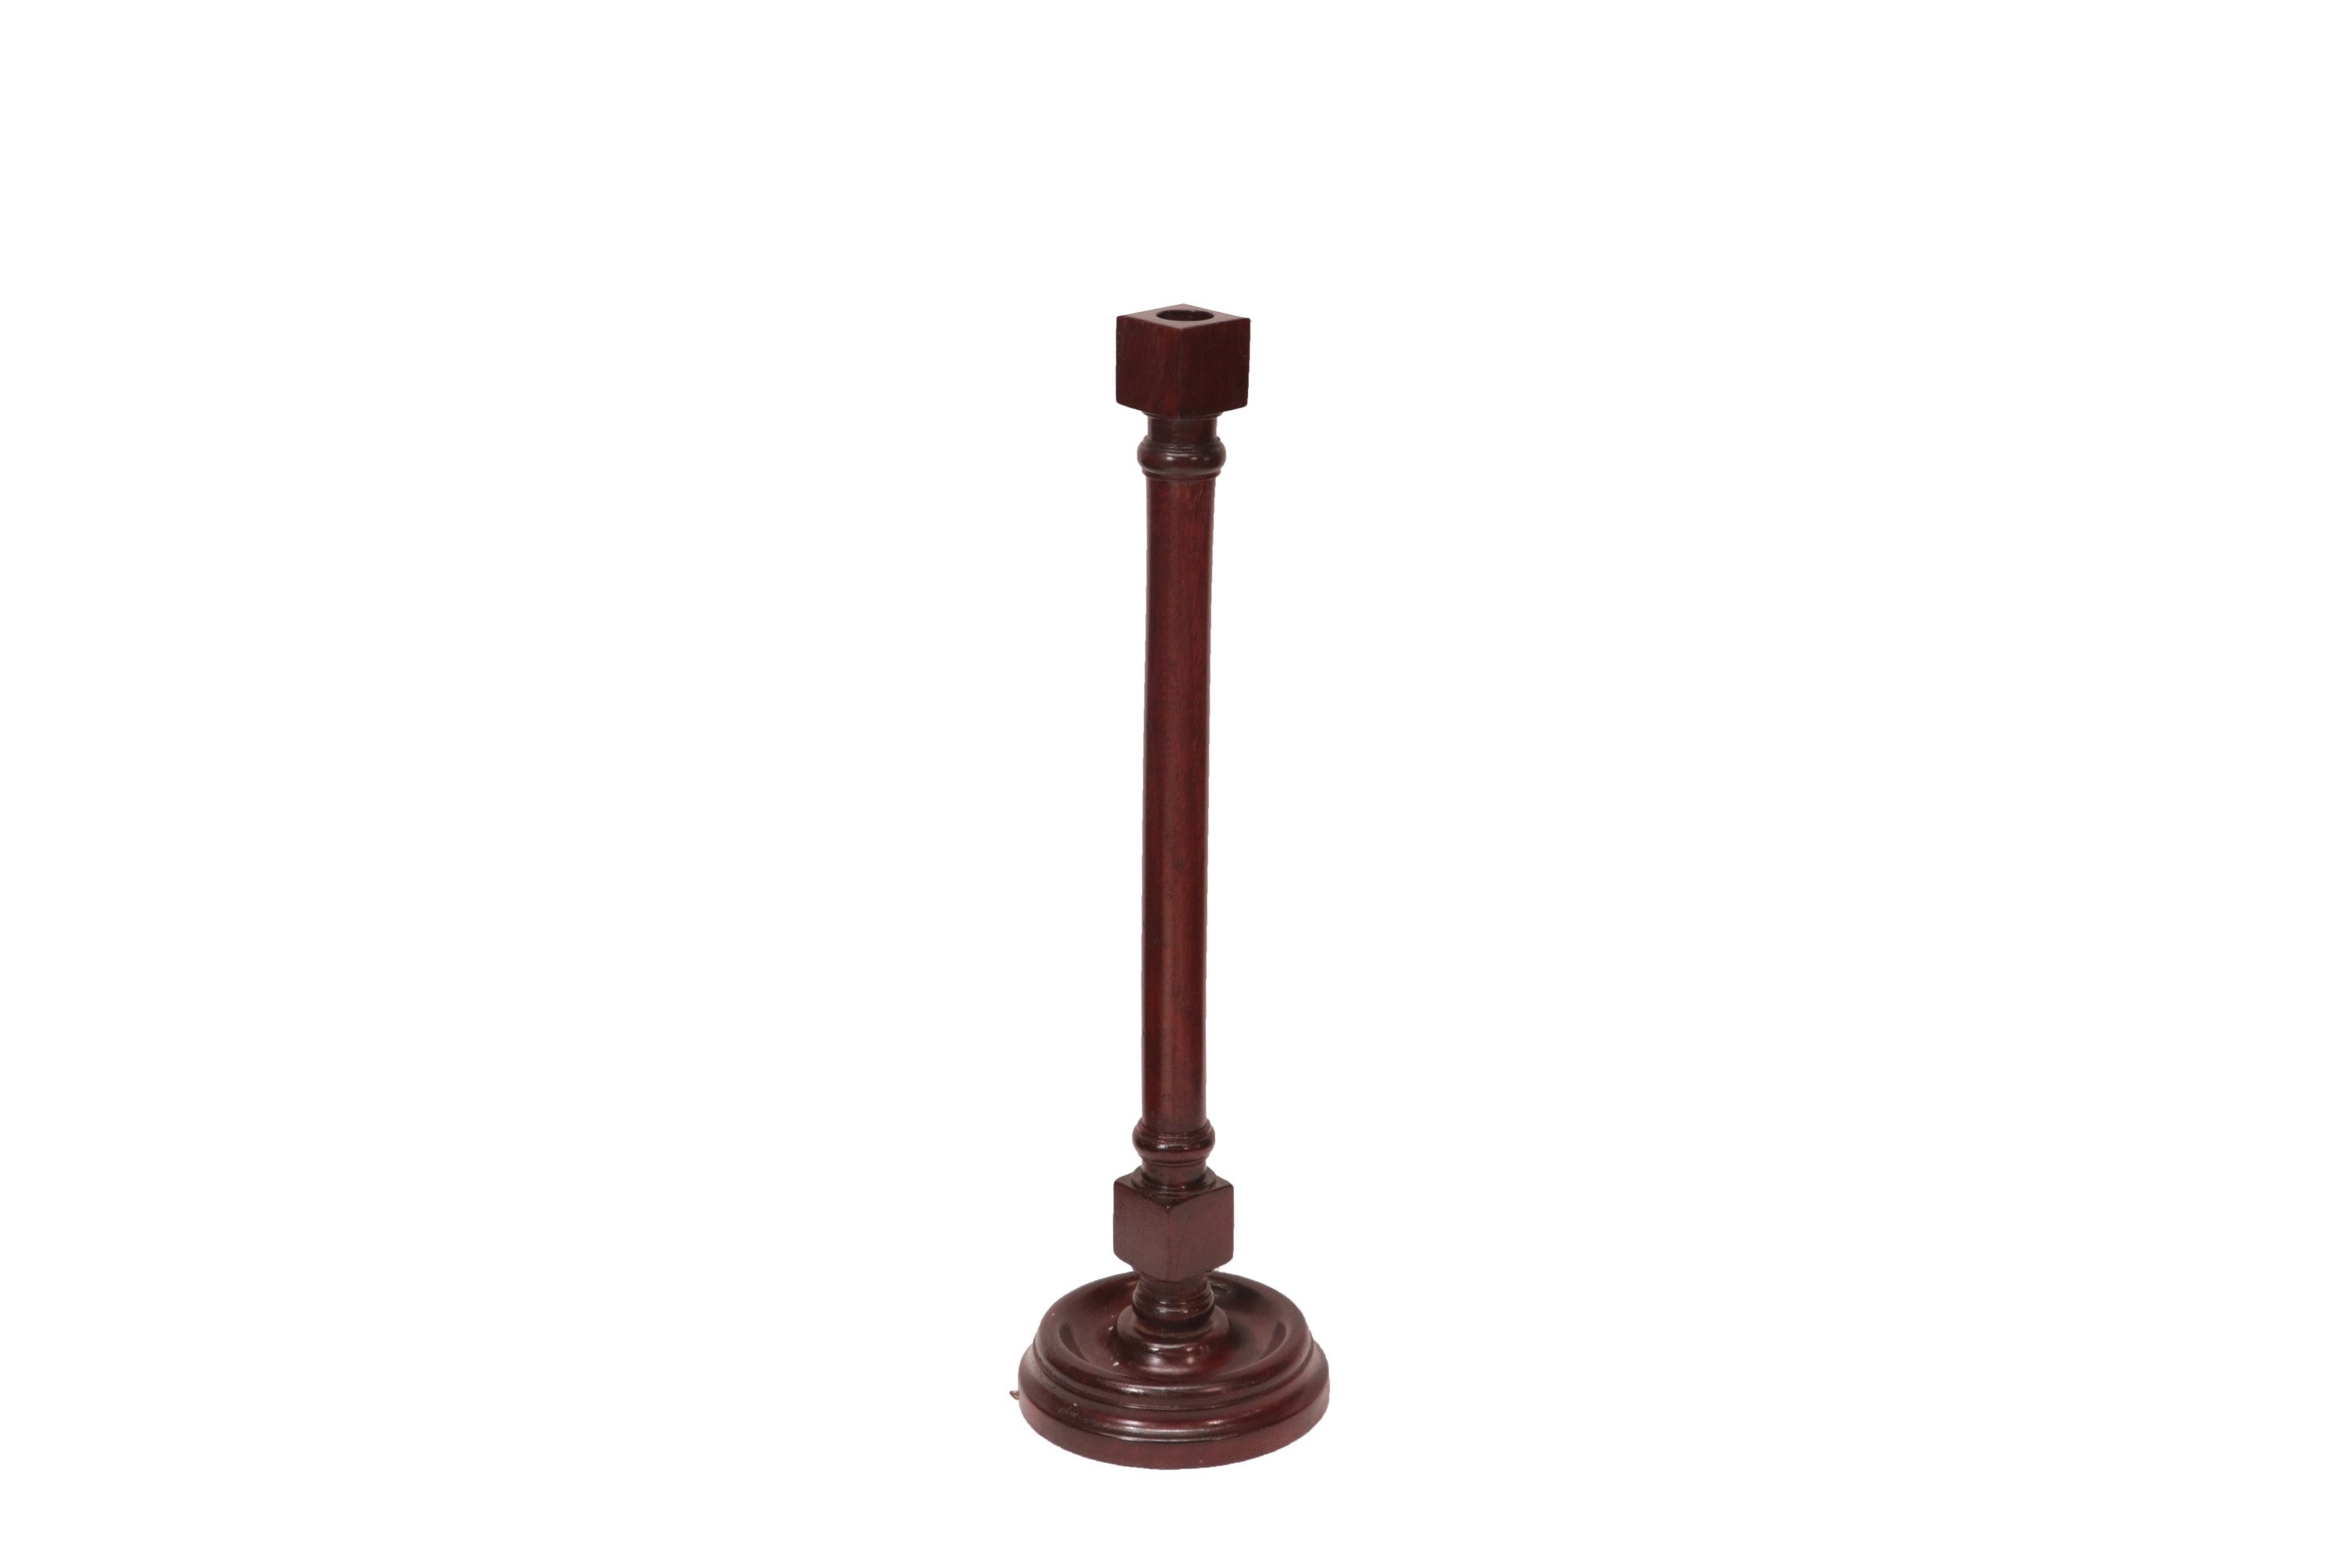 Slim Pillar Wooden Candle Holder Large size (5 x 5 x 19 Inch) Candle Holder